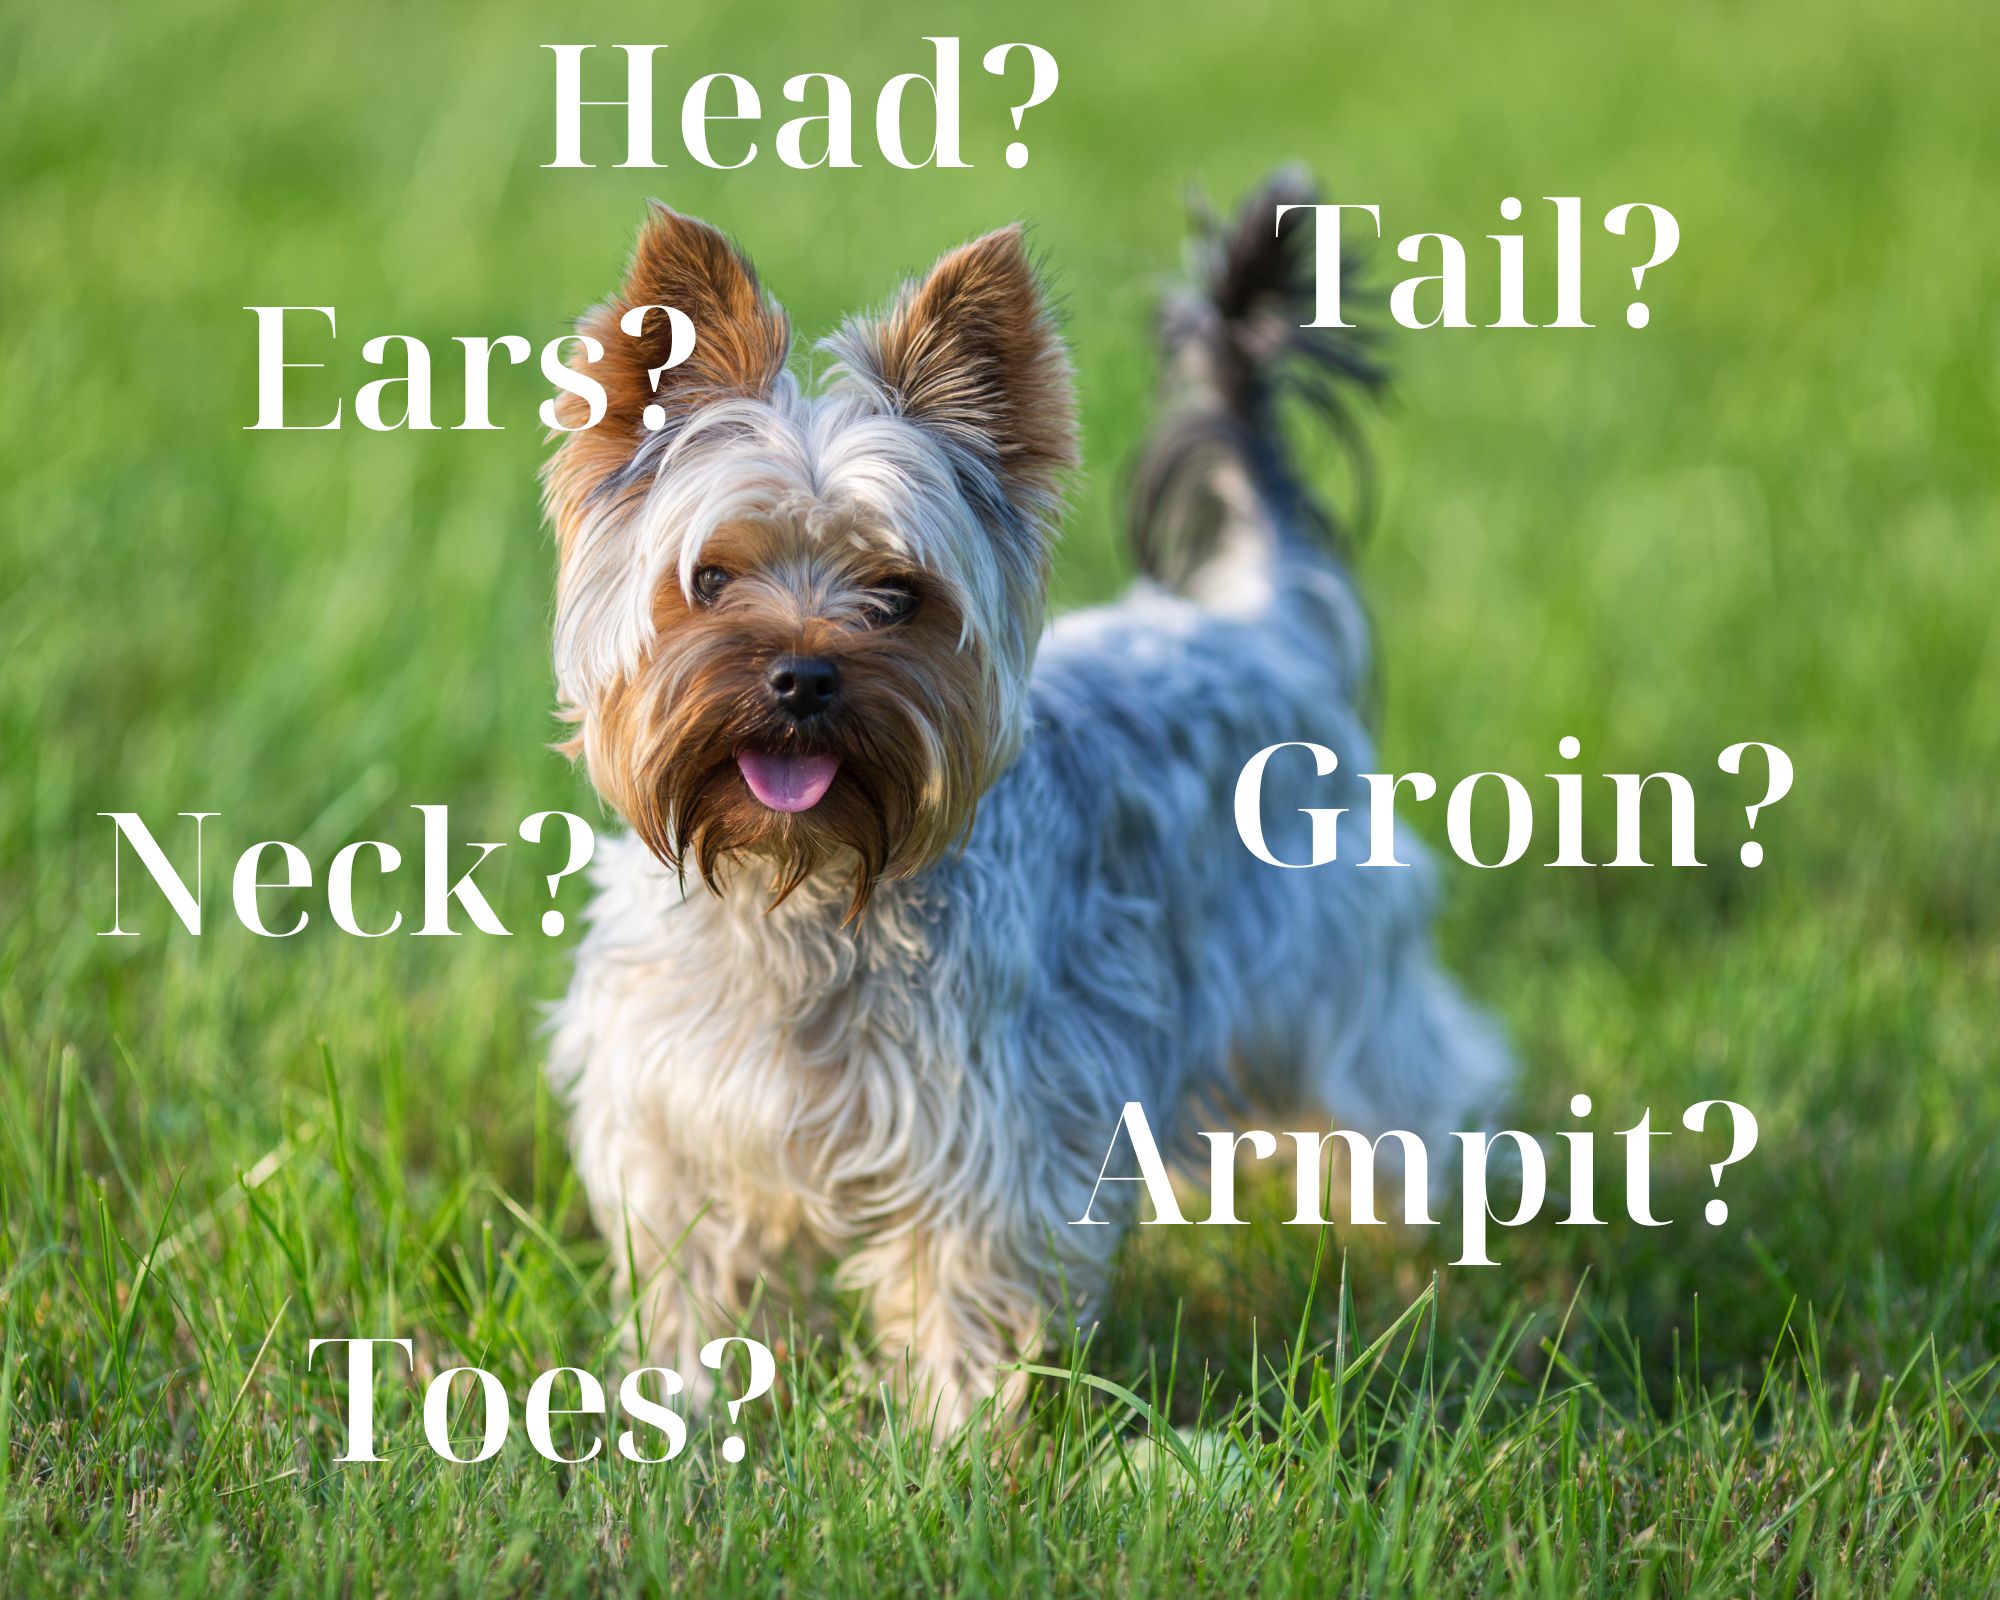 Alert terrier in grass facing camera with text superimposed listing body parts where ticks attach